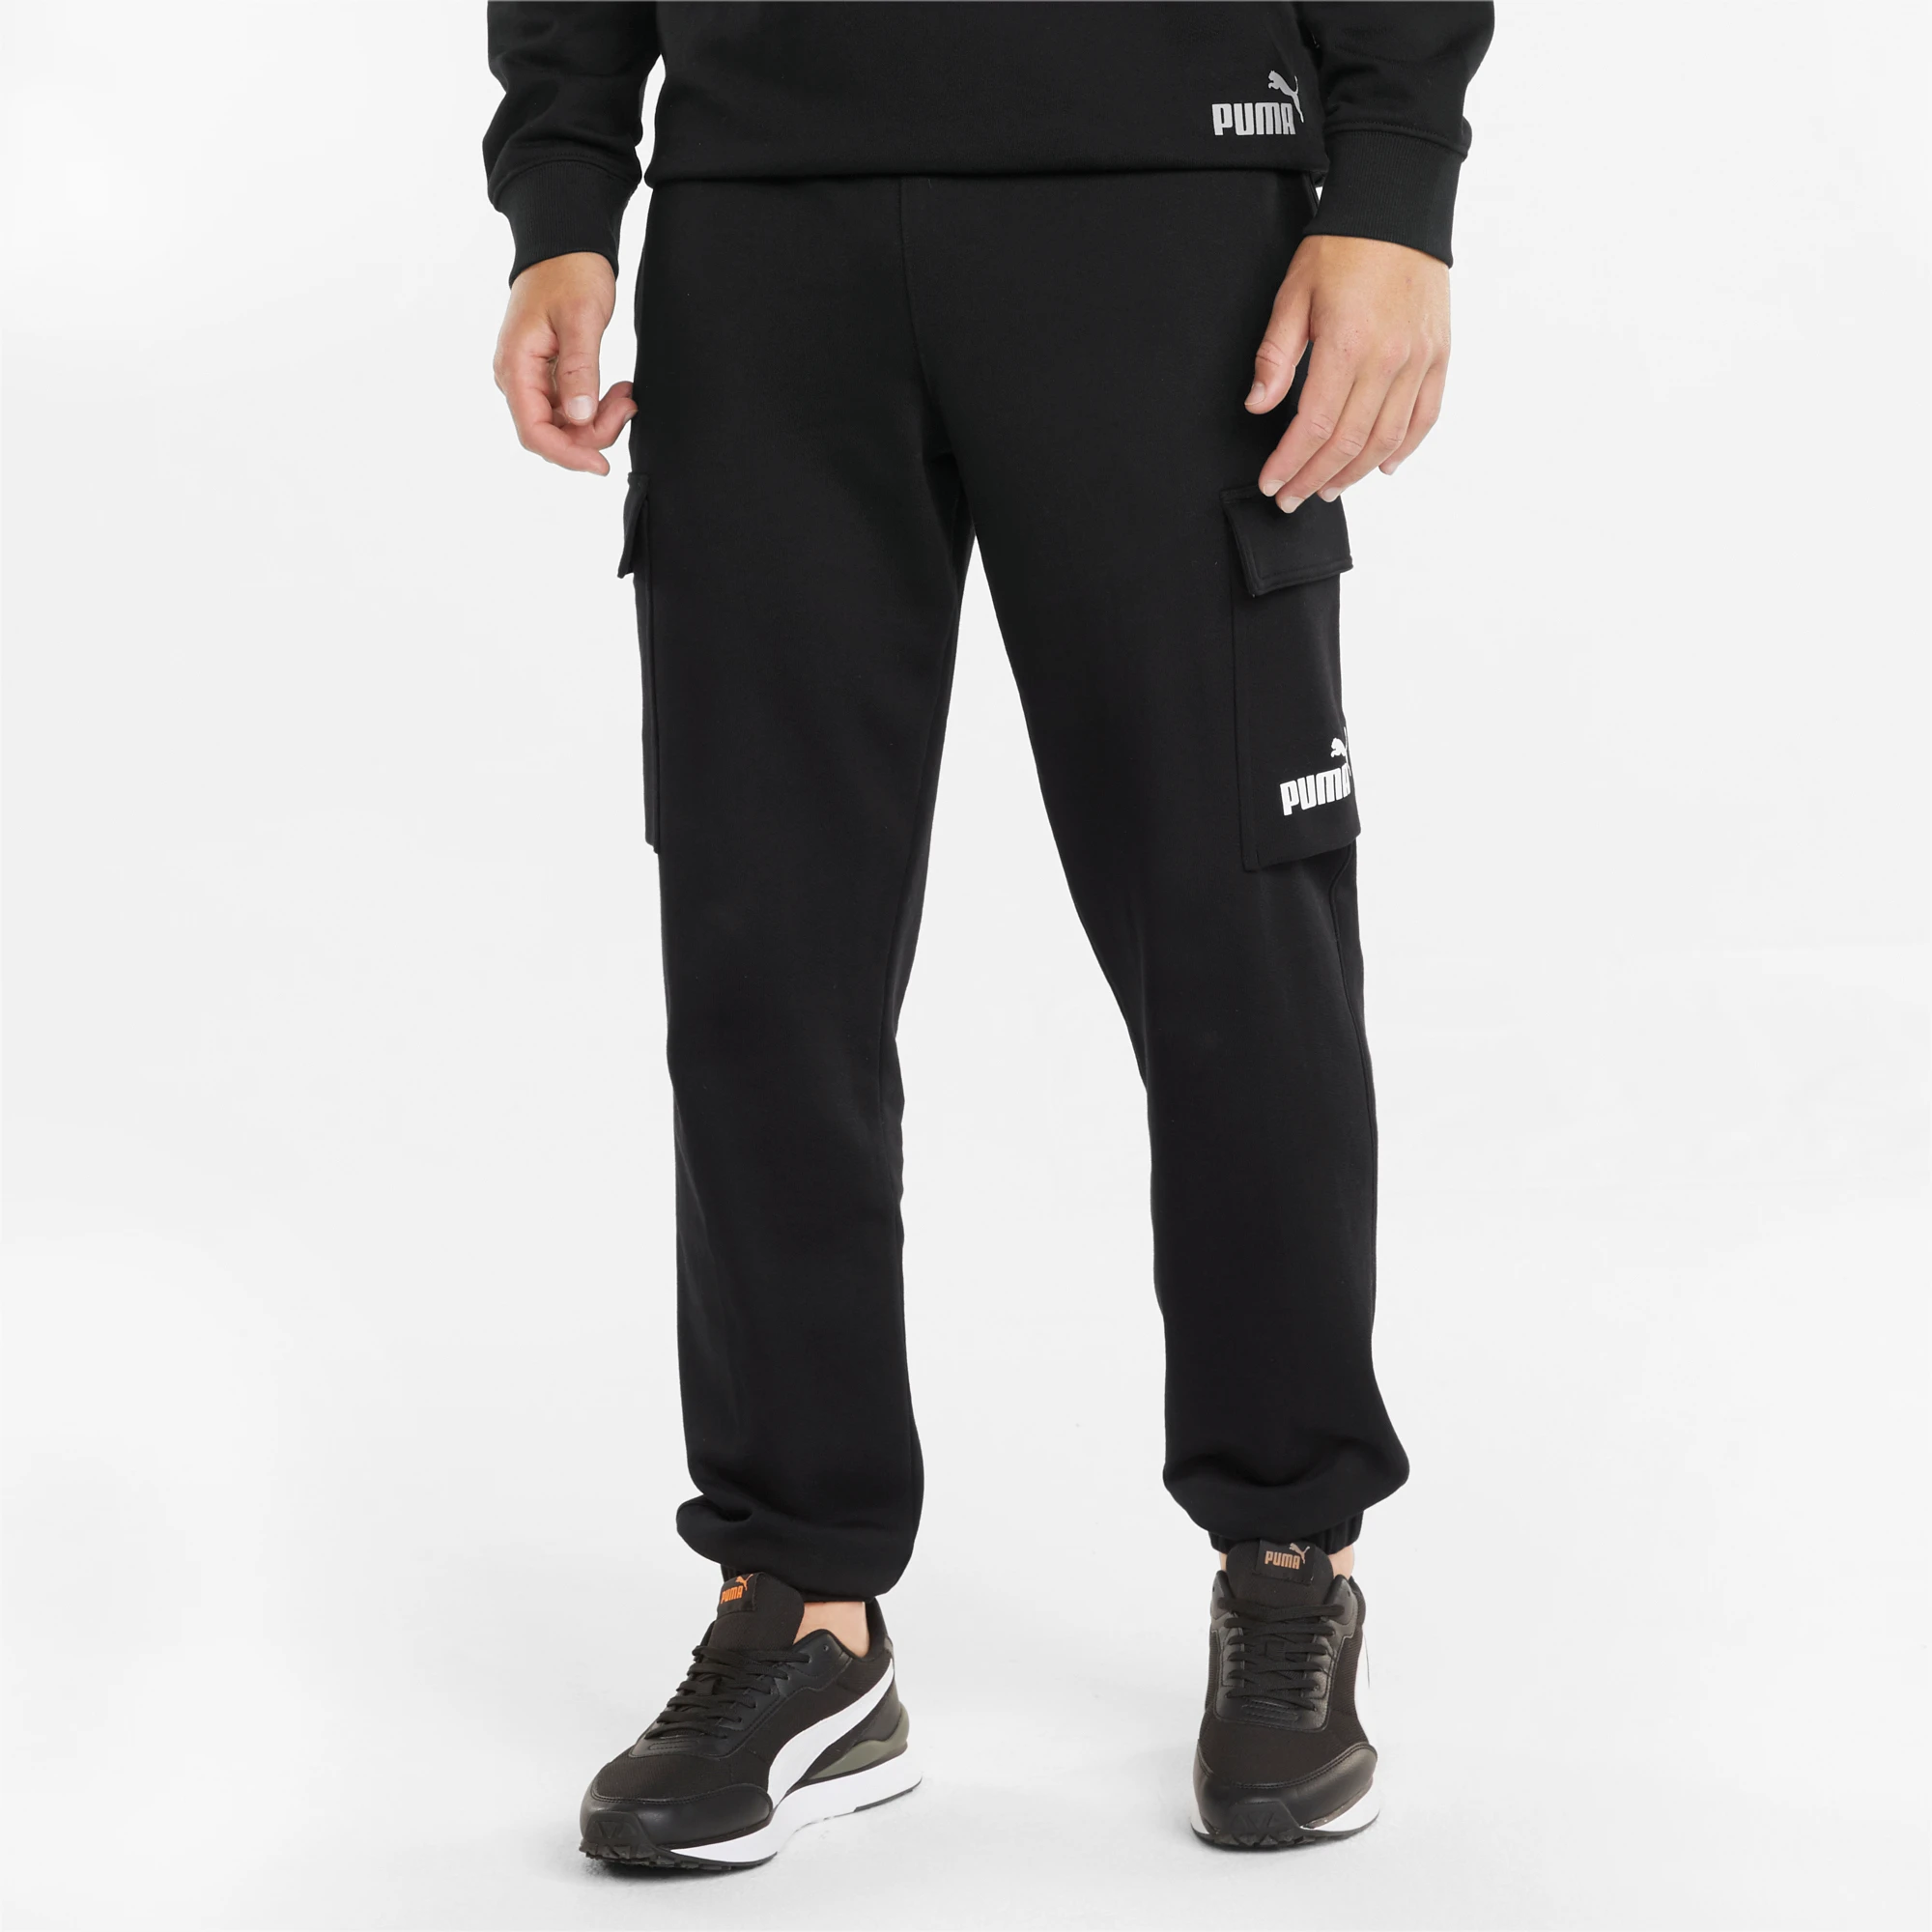 Puma Cargo Pants: Navigating the Cityscape with Style and Utility